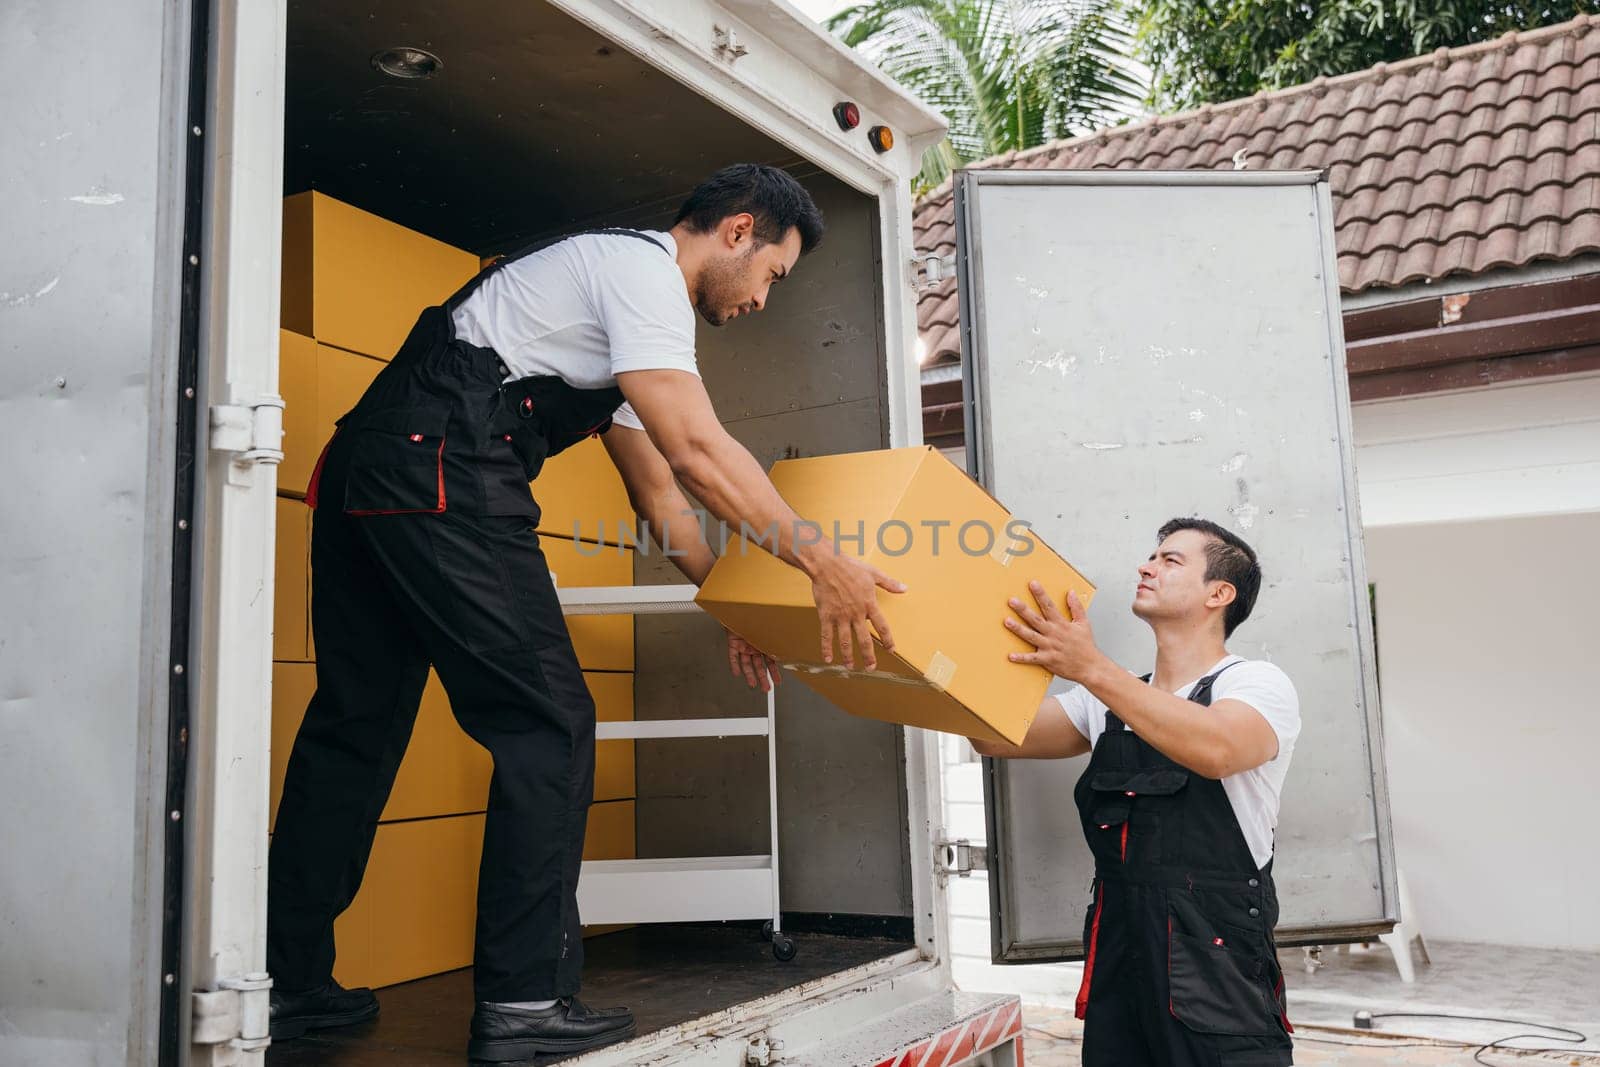 Uniformed employees carry out efficient unloading of cardboard boxes from the truck for customer relocation. Their teamwork guarantees a happy move. Moving Day by Sorapop